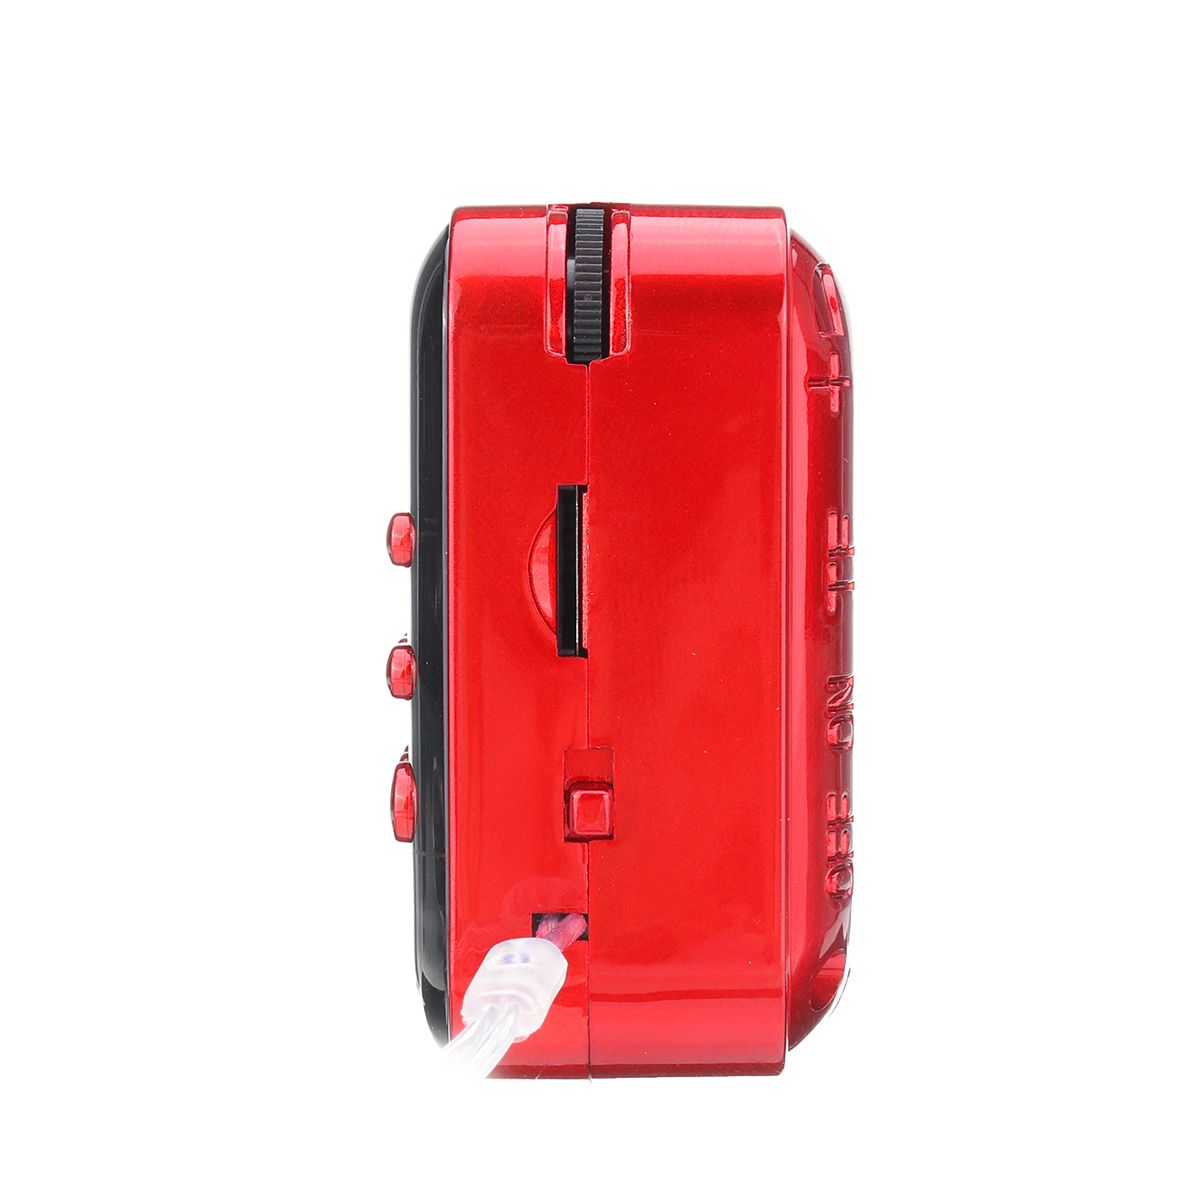 Portable-DC-5V-3W-FM-70MHz-108MHz-Handheld-Digital-Radio-Music-Player-Rechargeable-TF-Card-Speaker-1568350